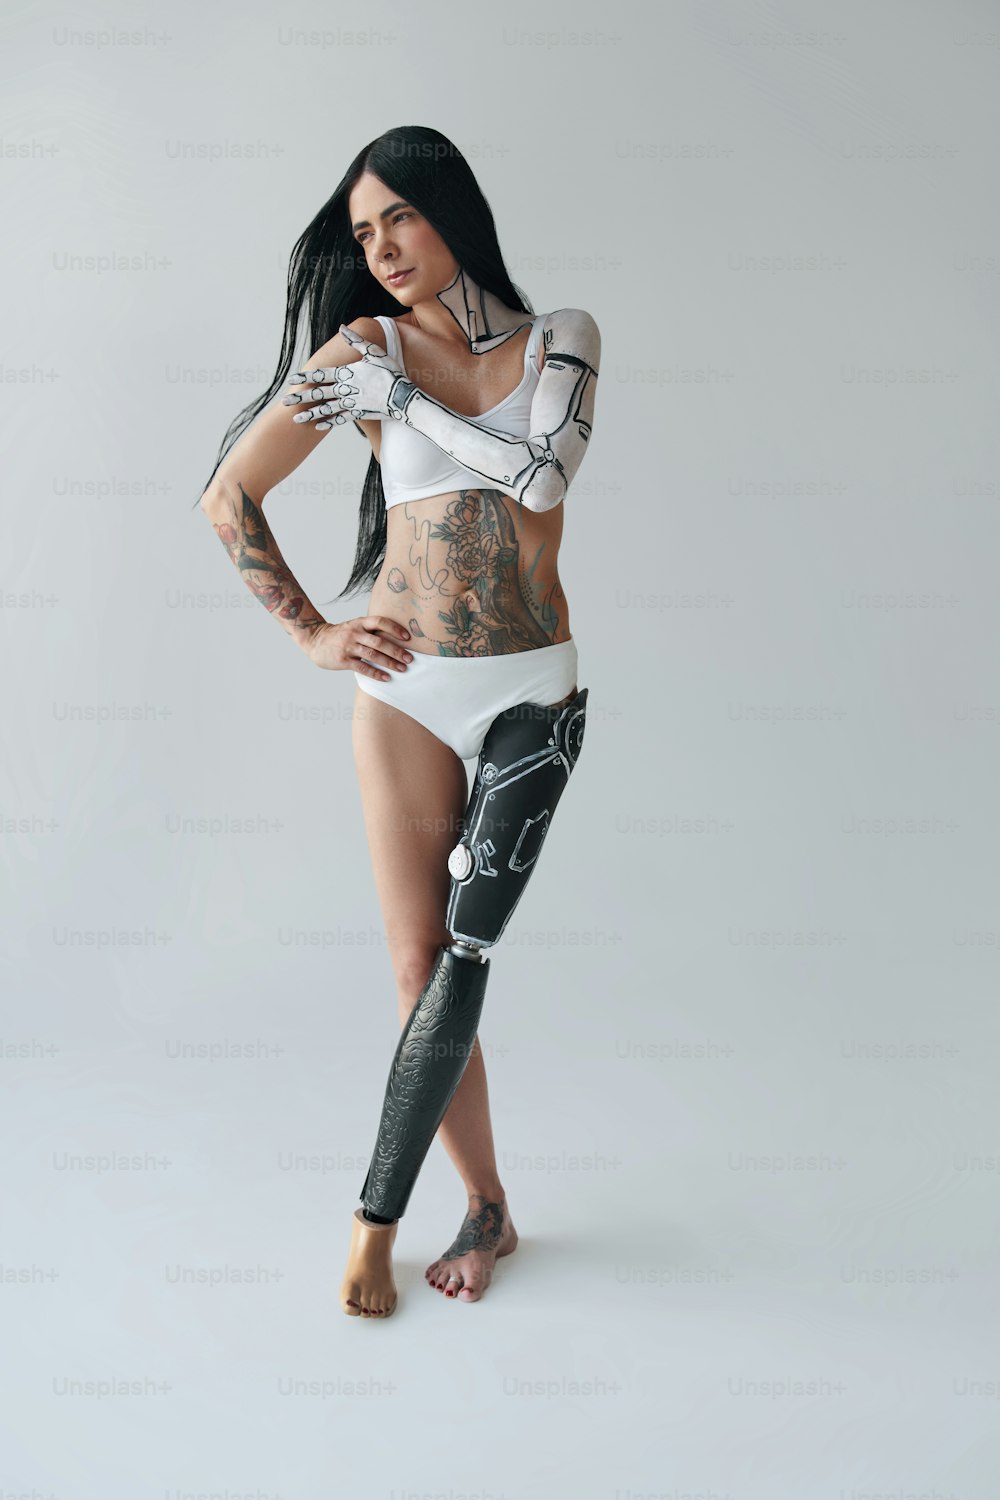 Full length view of the tattooed woman with artificial leg and cyber body art posing at the studio. Unusual appearance concept. Stock photo